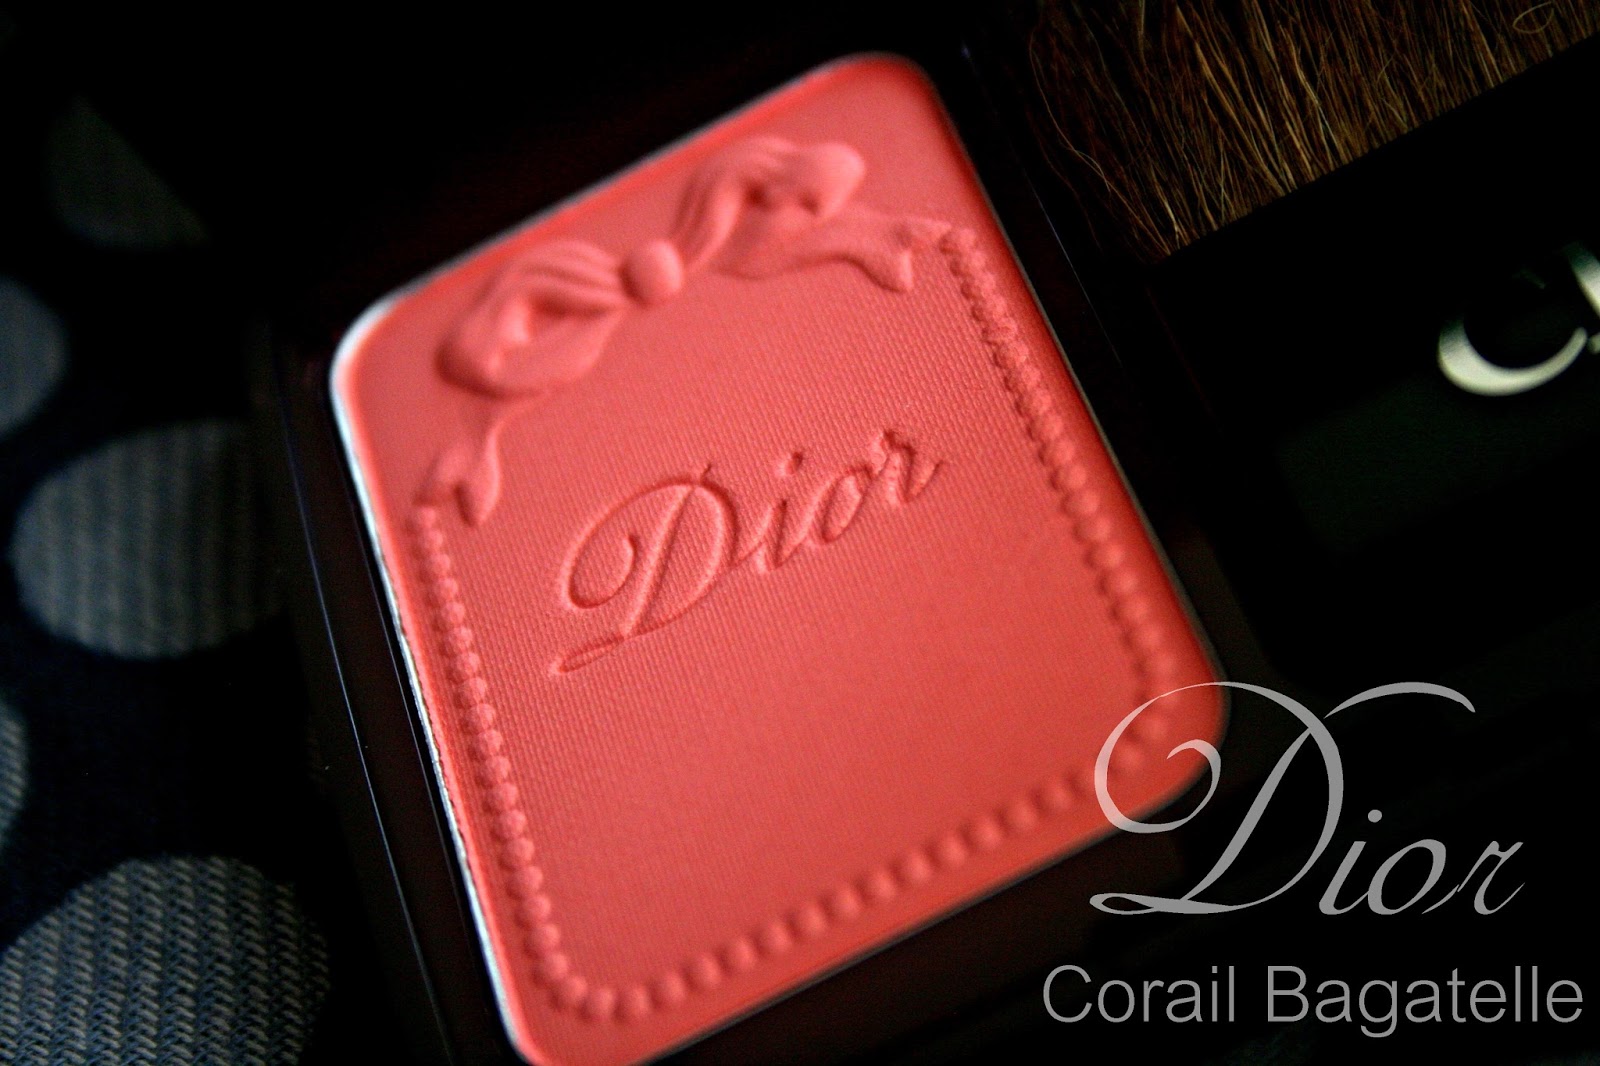 Dior Blush in Corail Bagatelle Dior Trianon Spring 2014 Collection Review, Photos & Swatches